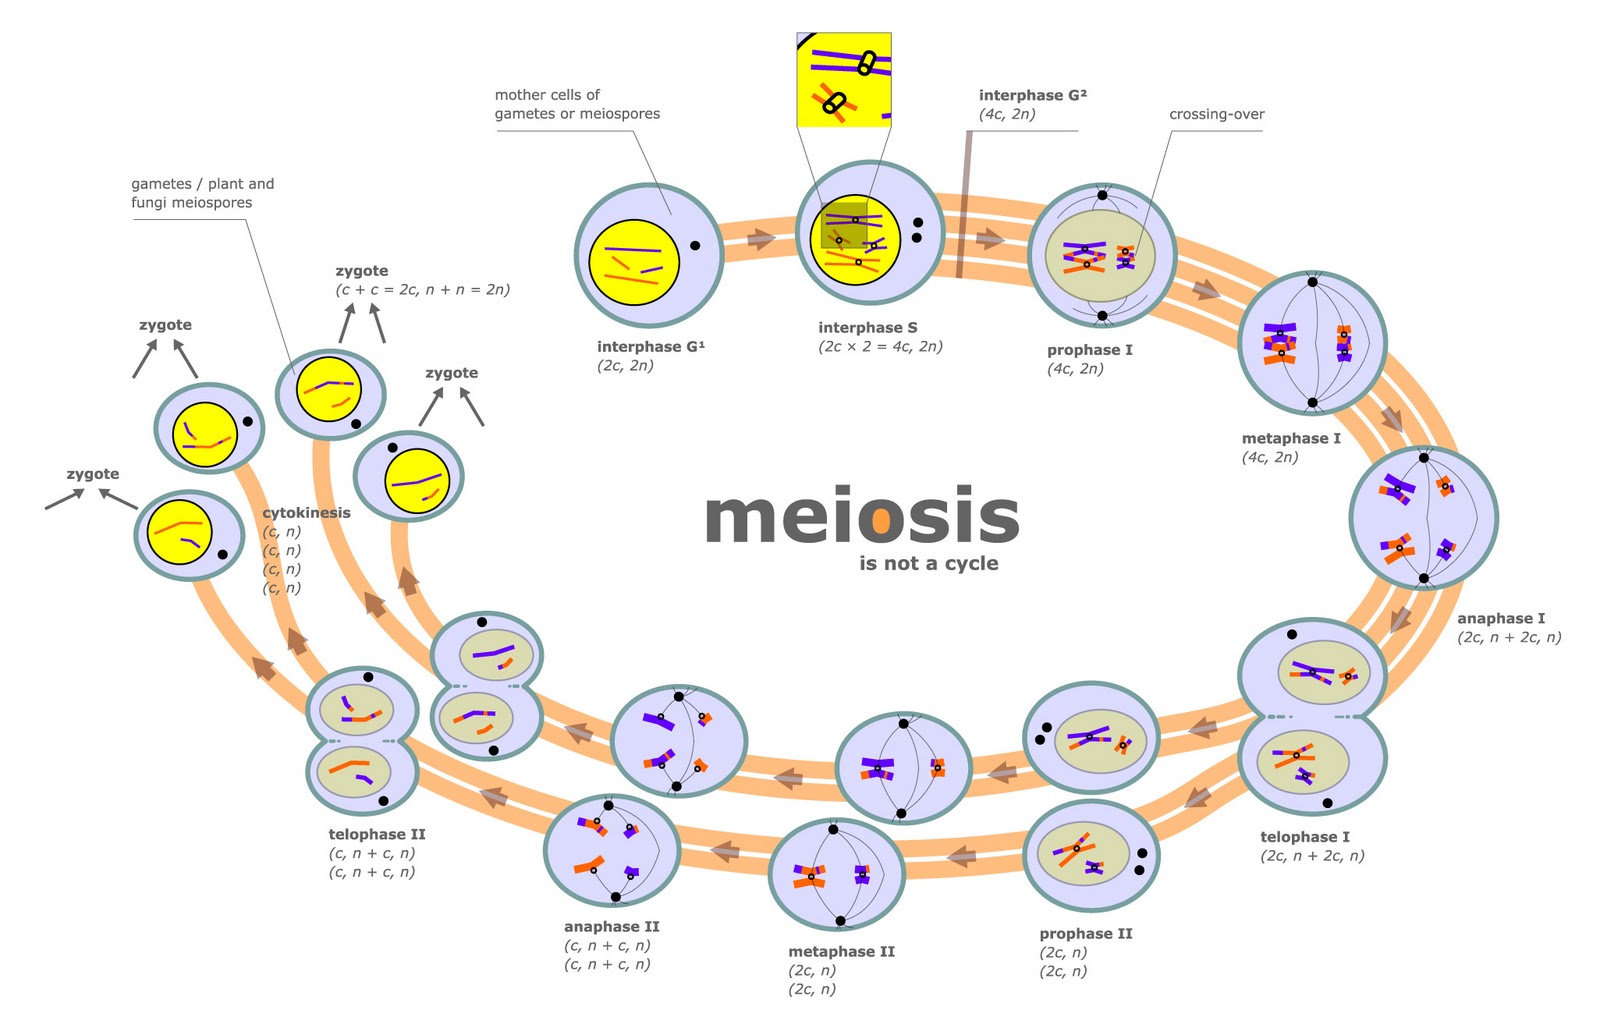 Image from: http://commons.wikimedia.org/wiki/File:Meiosis_diagram.-3.bp.blogspot.com